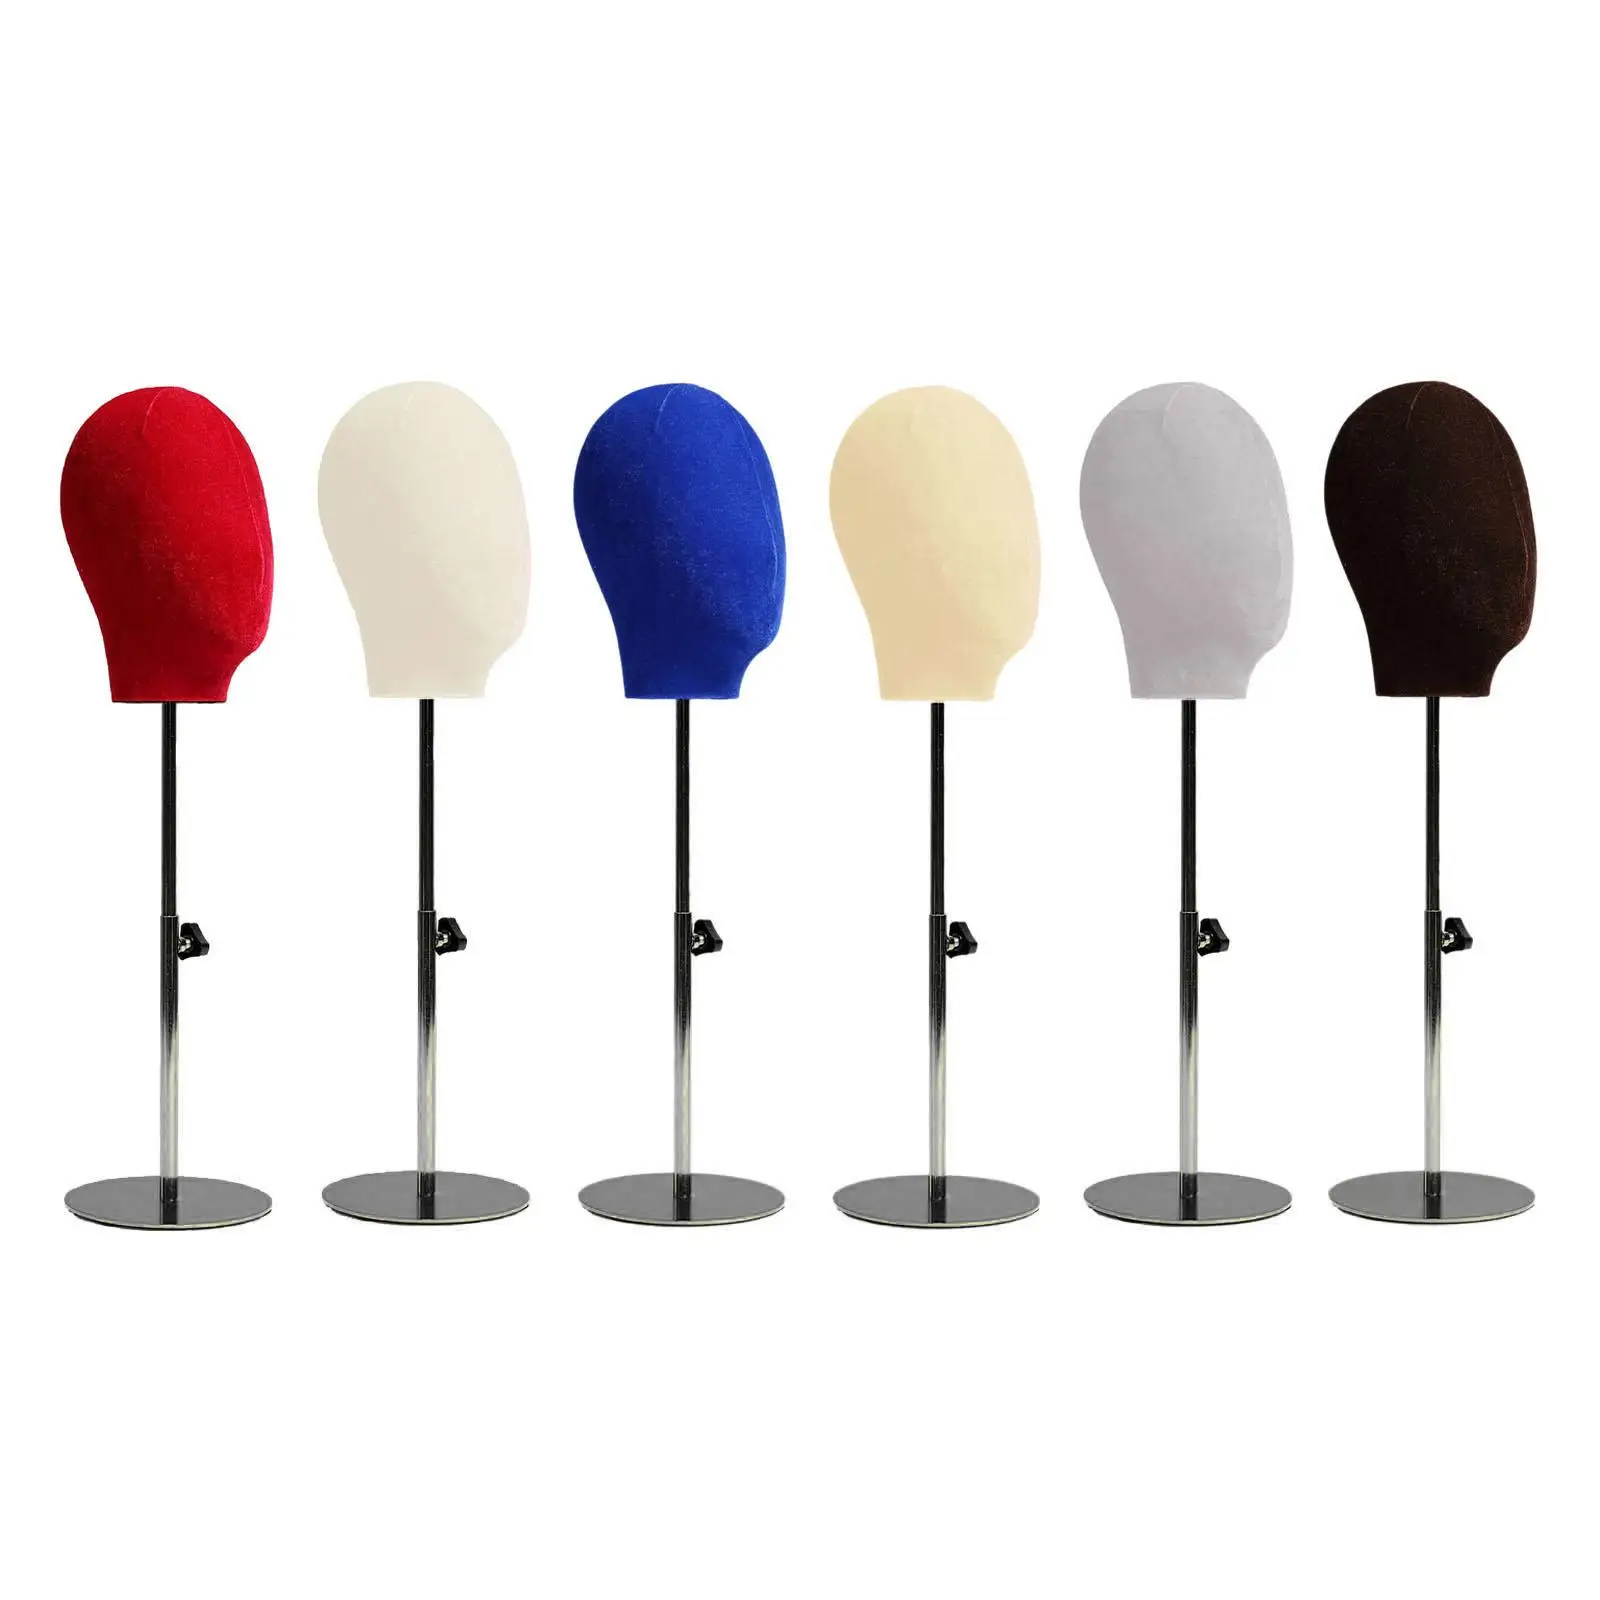 Mannequin Head Detachable Wig Hat Stand Durable Professional Display Holder Fashion Head Model for Home Shop Men Wig Women